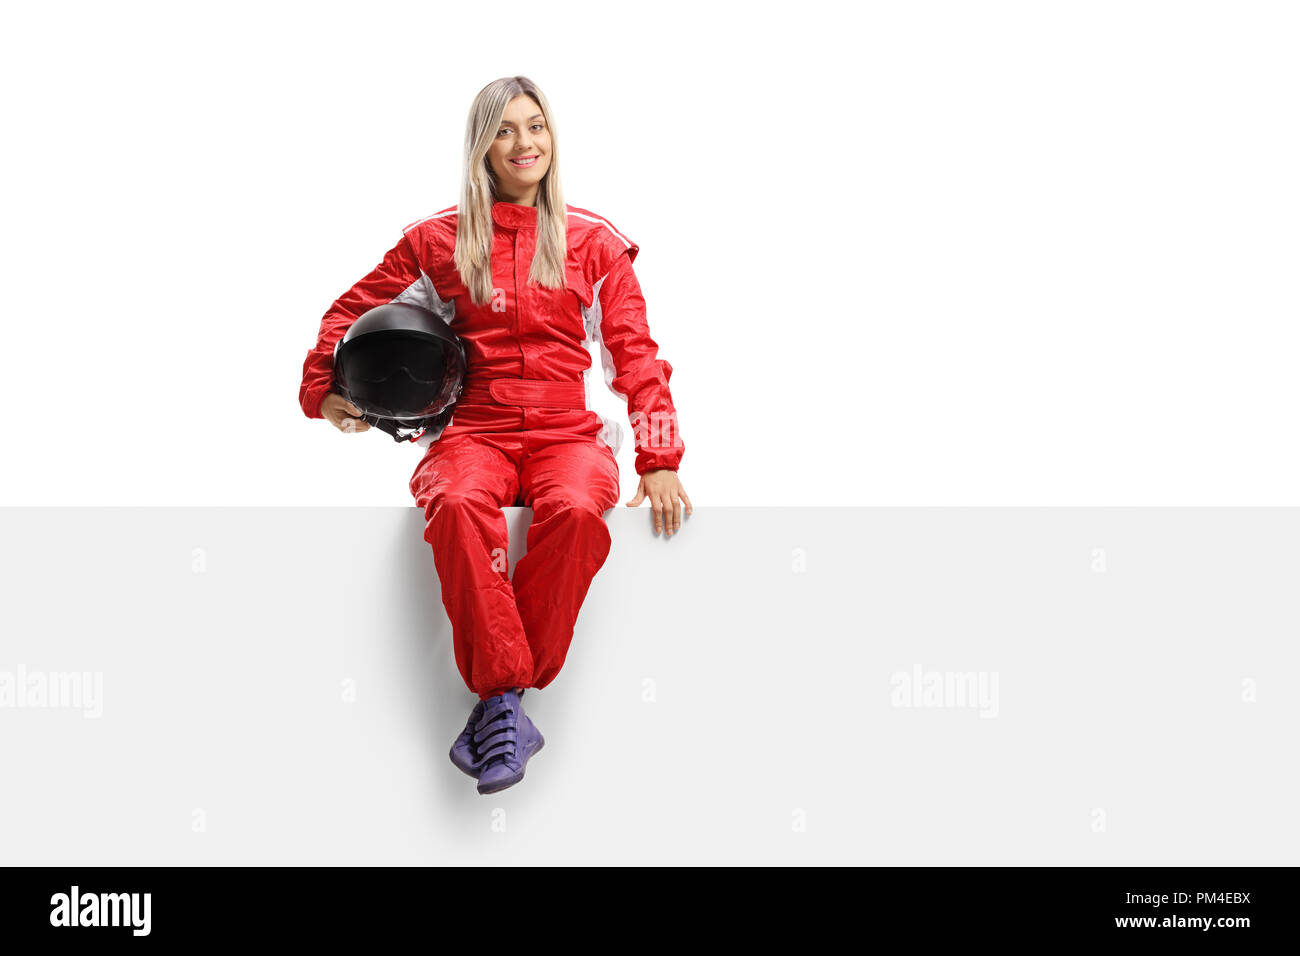 Female racer in a suit sitting on a panel isolated on white background Stock Photo